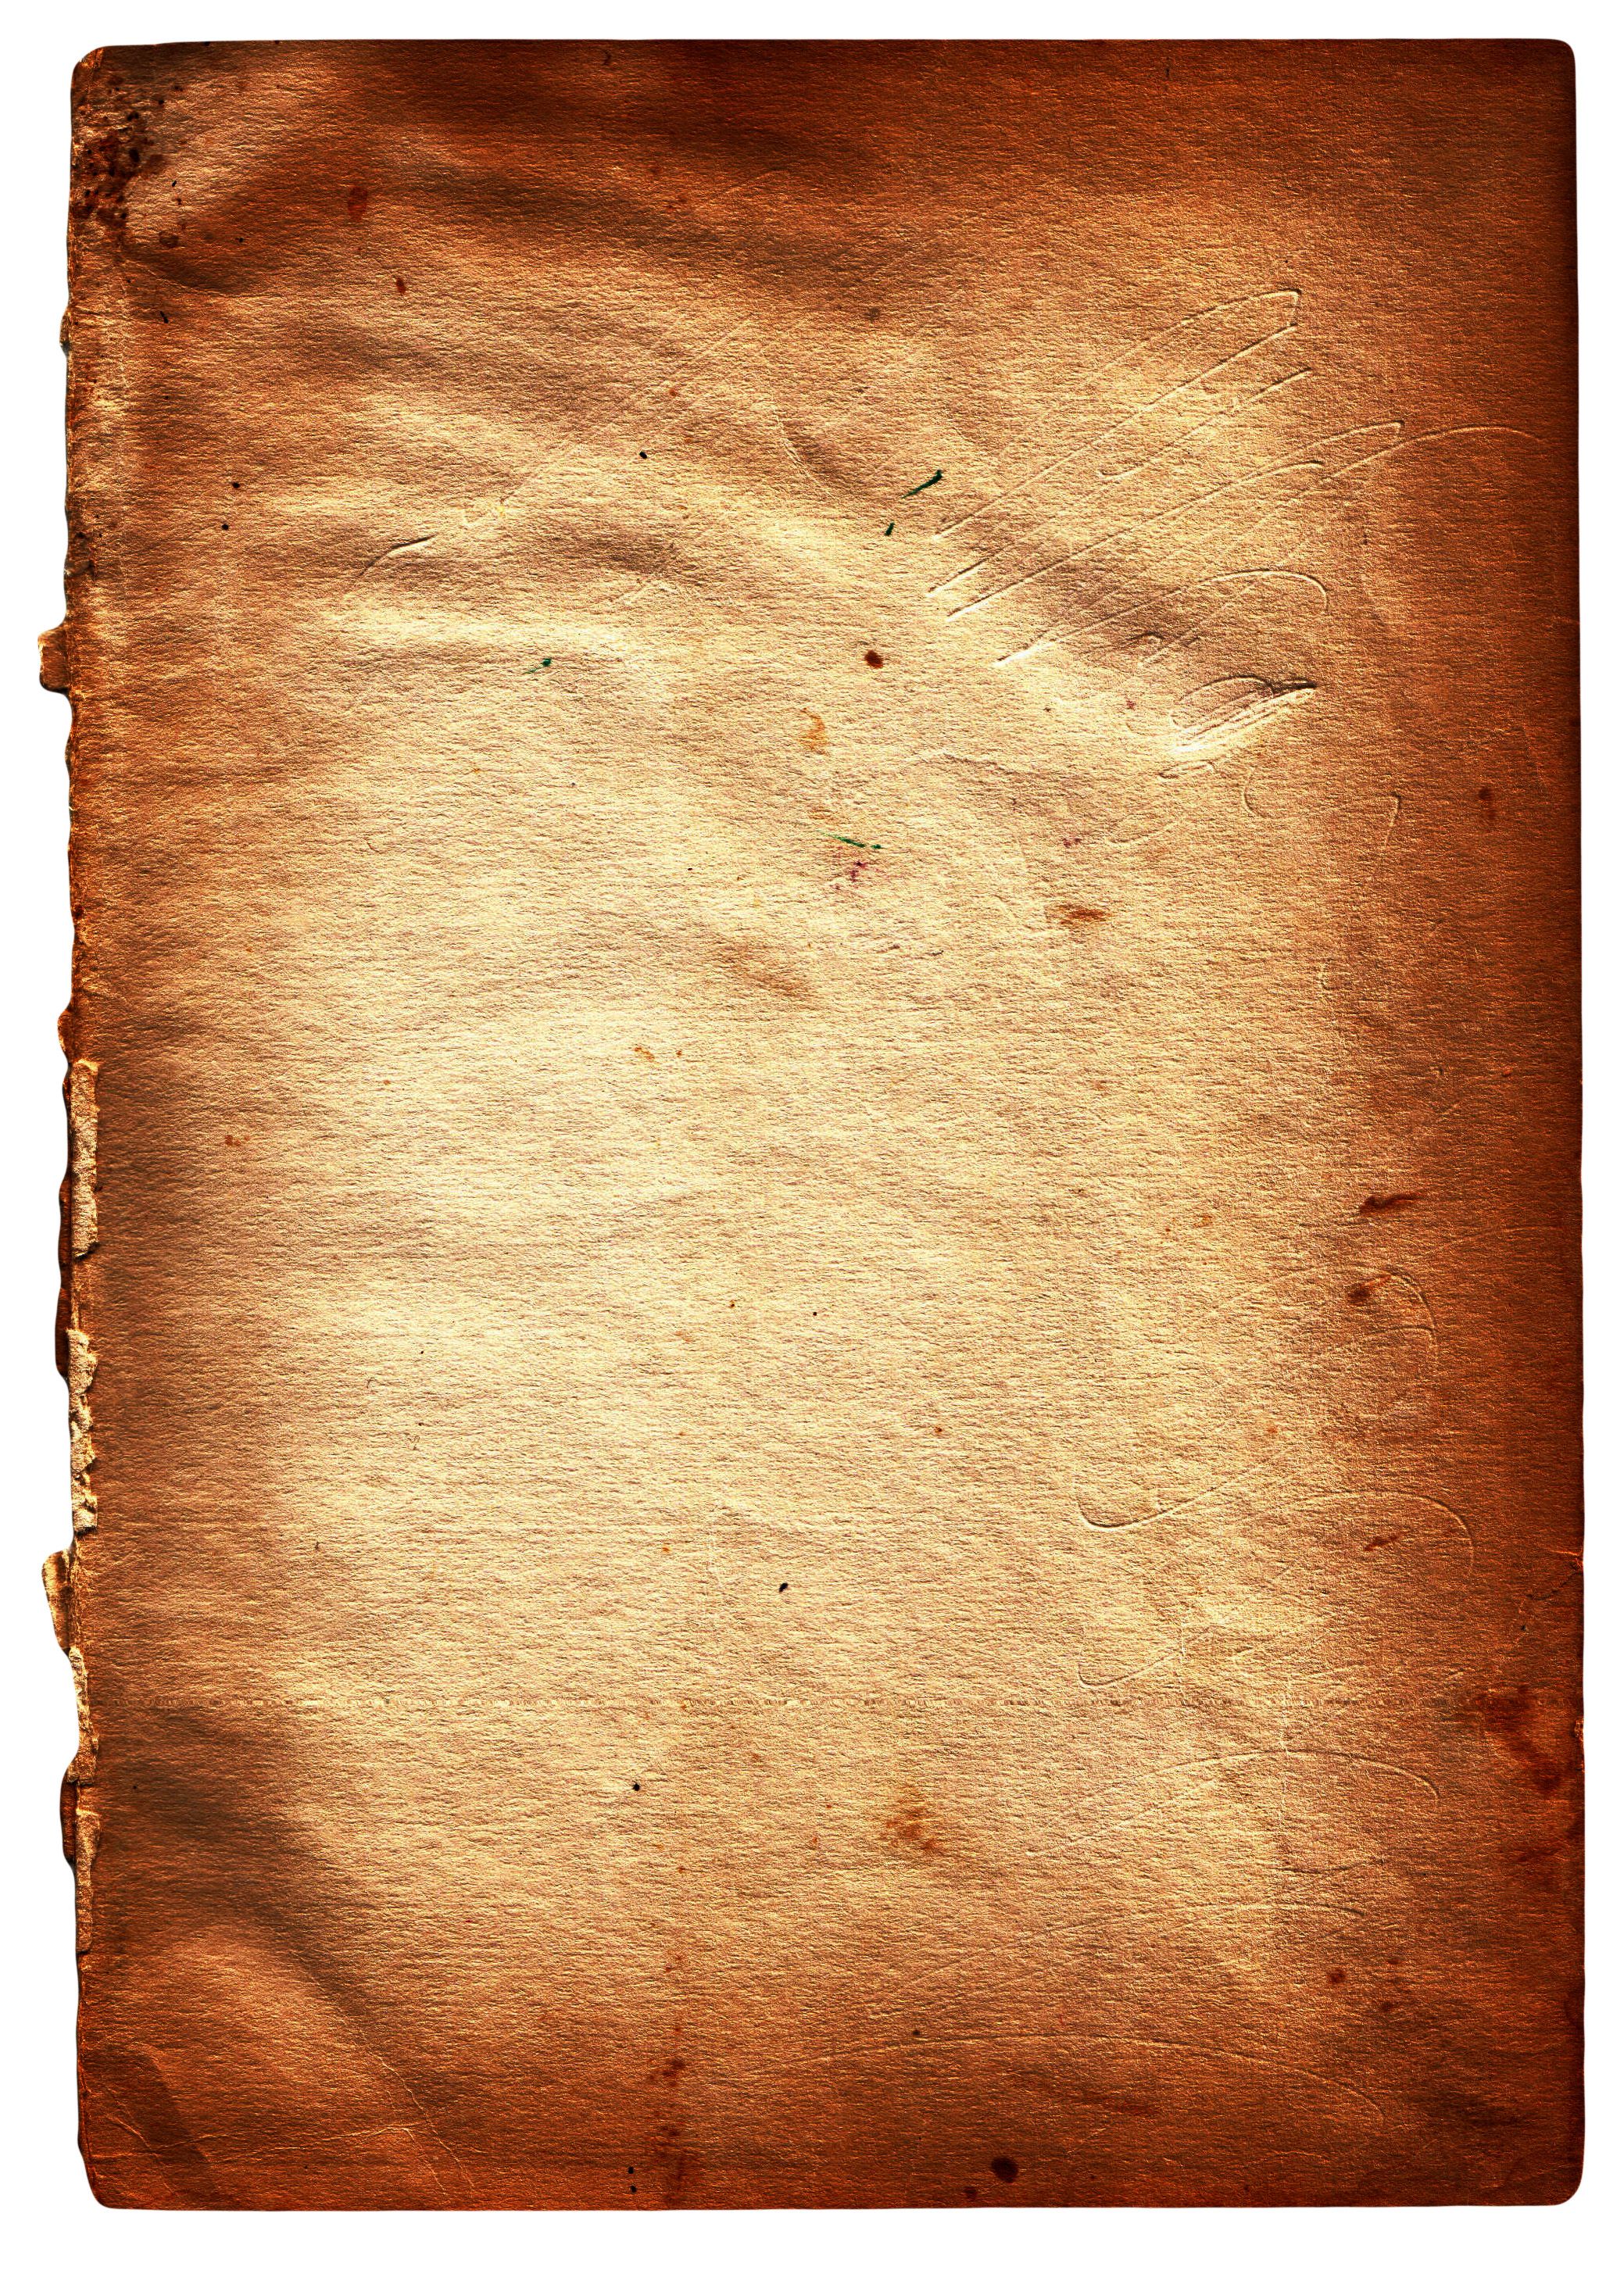 Download texture old paper texture background free image Harry